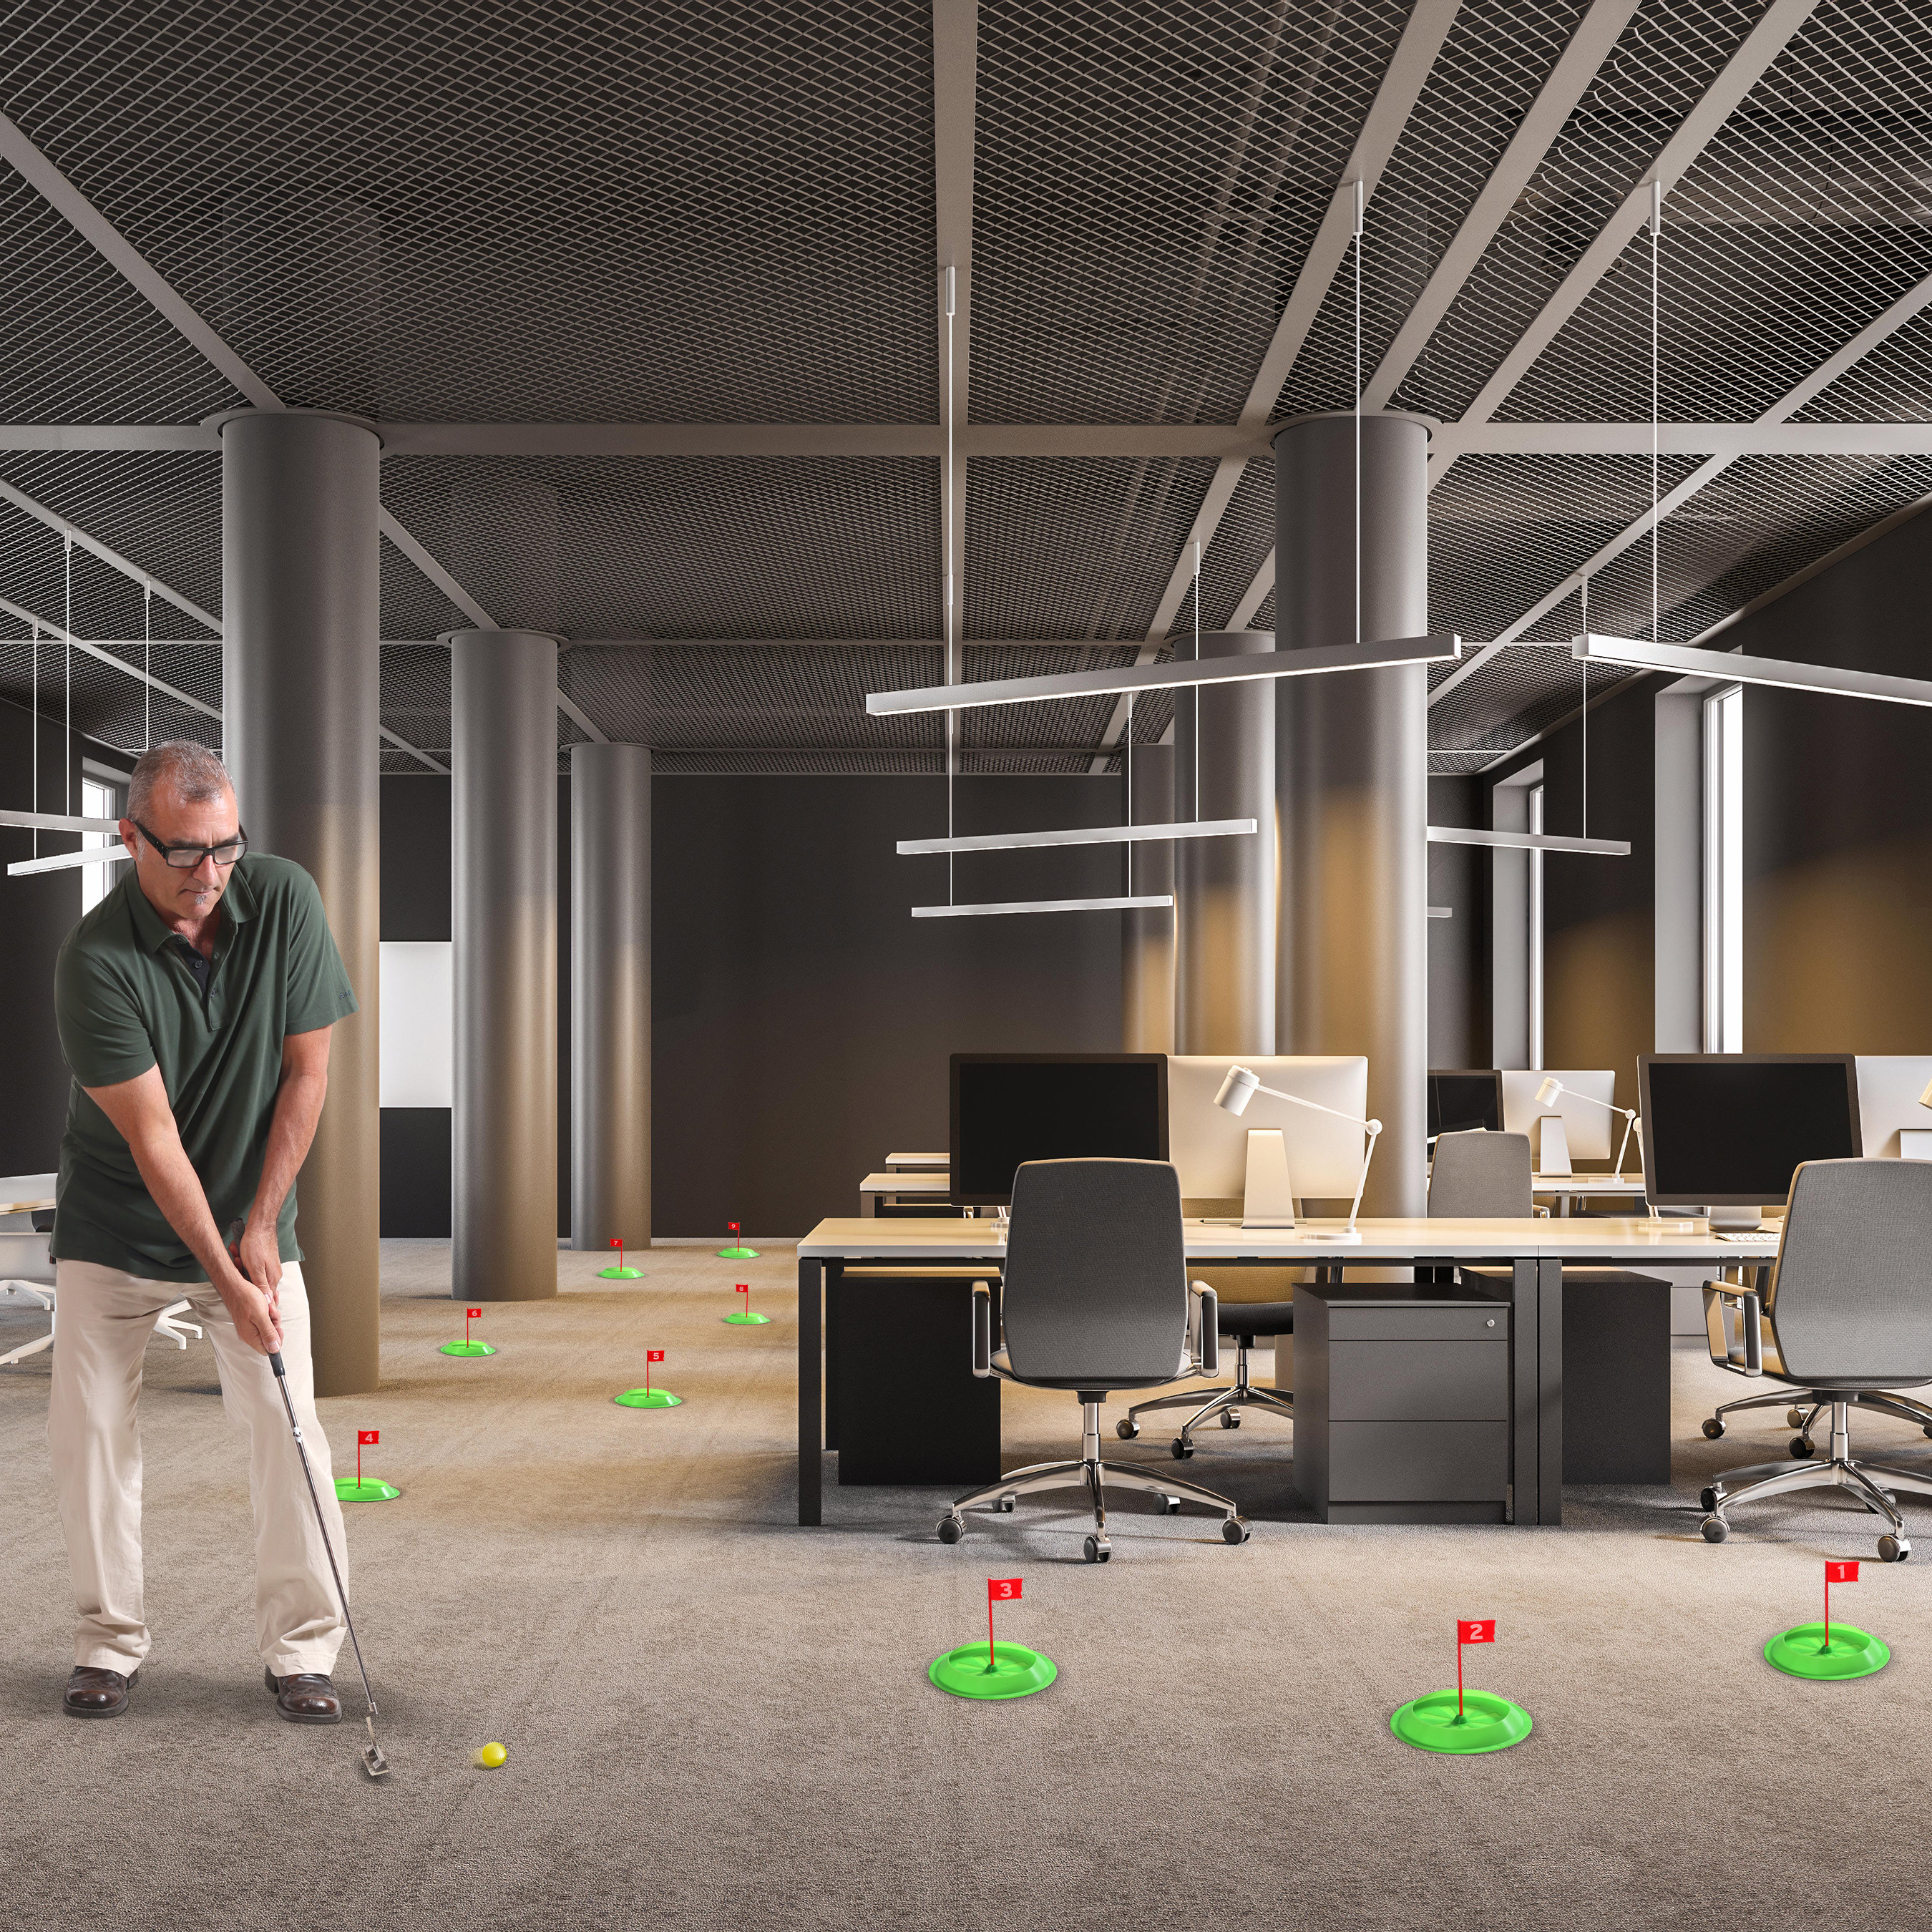 do people really play putt putt in the office